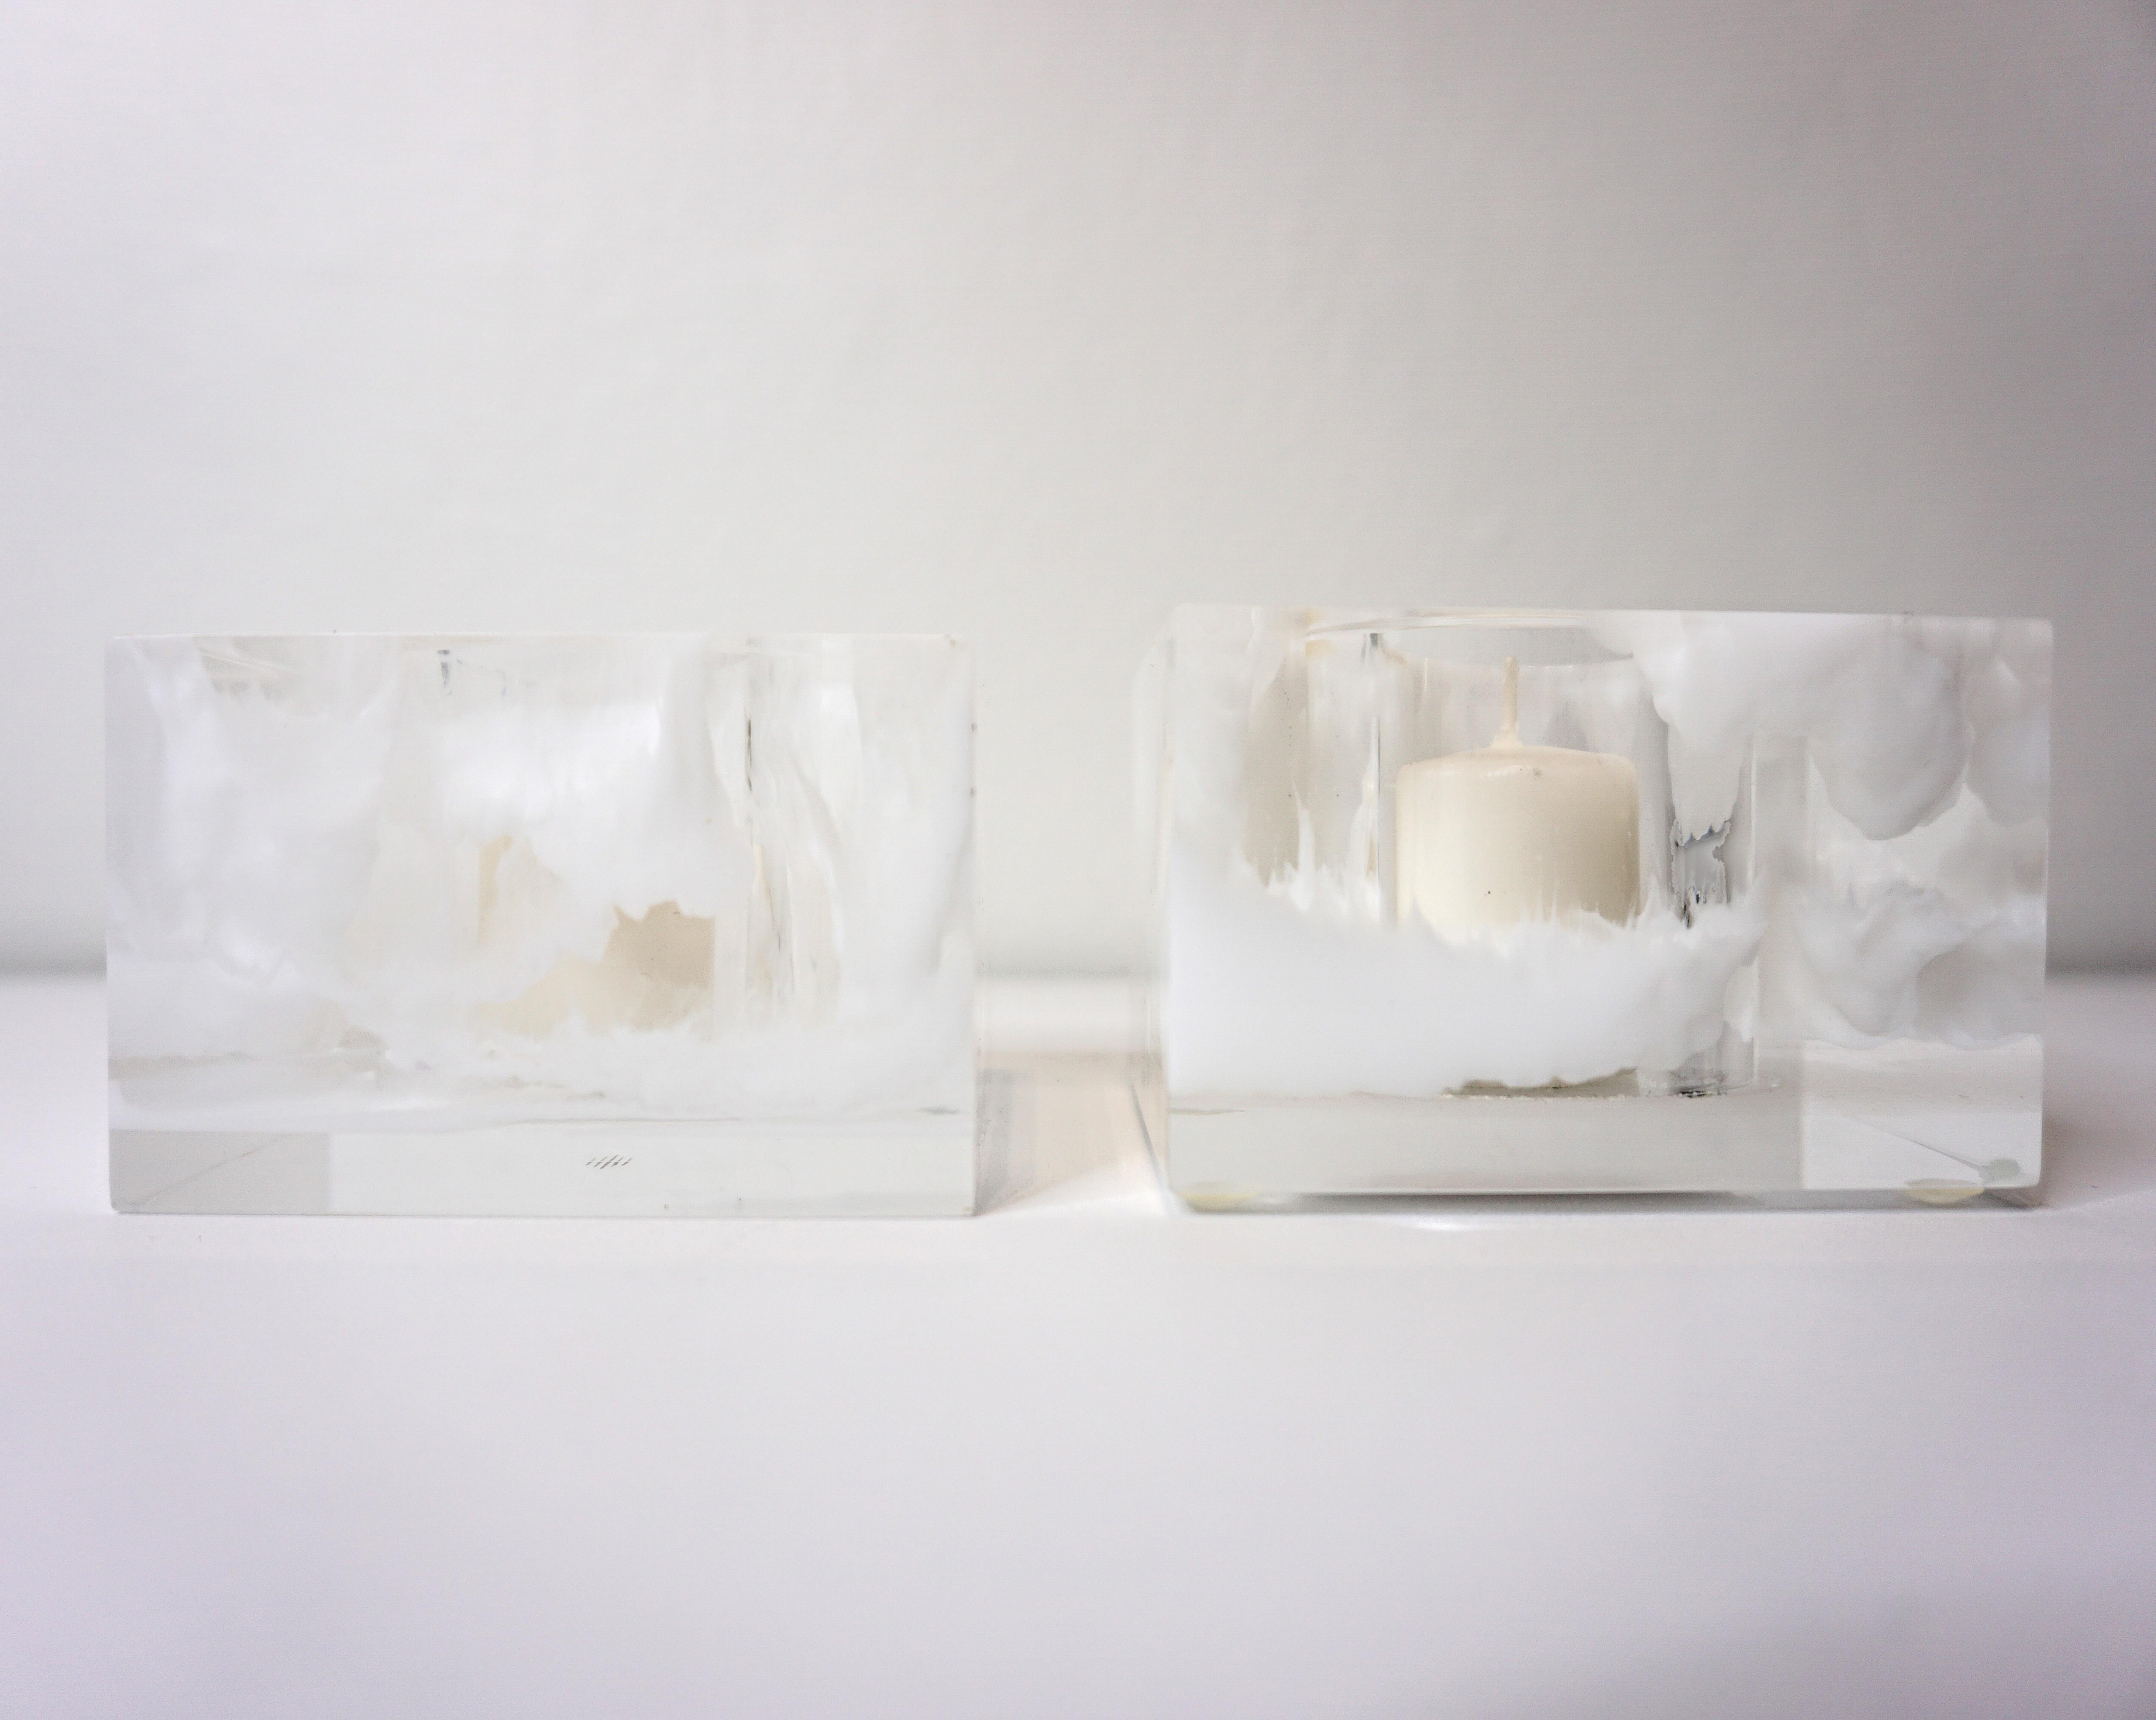 Sawyer Collection lucite and white swirled votives add a modern element to any decor.